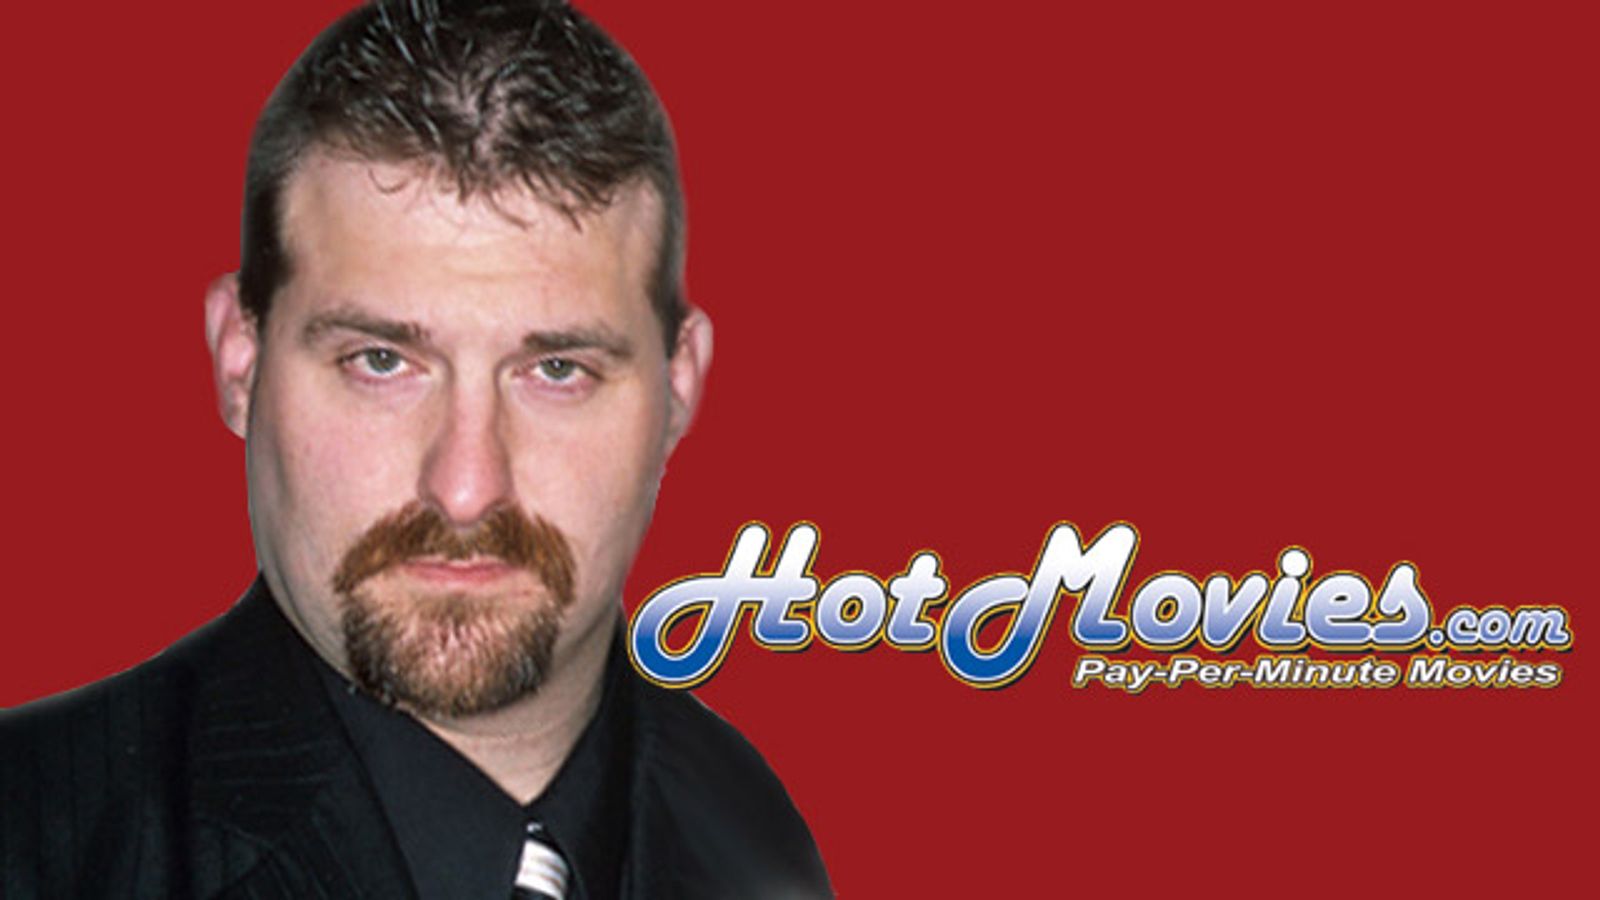 Rob Black Offers Exclusive Footage Only on HotMovies.com